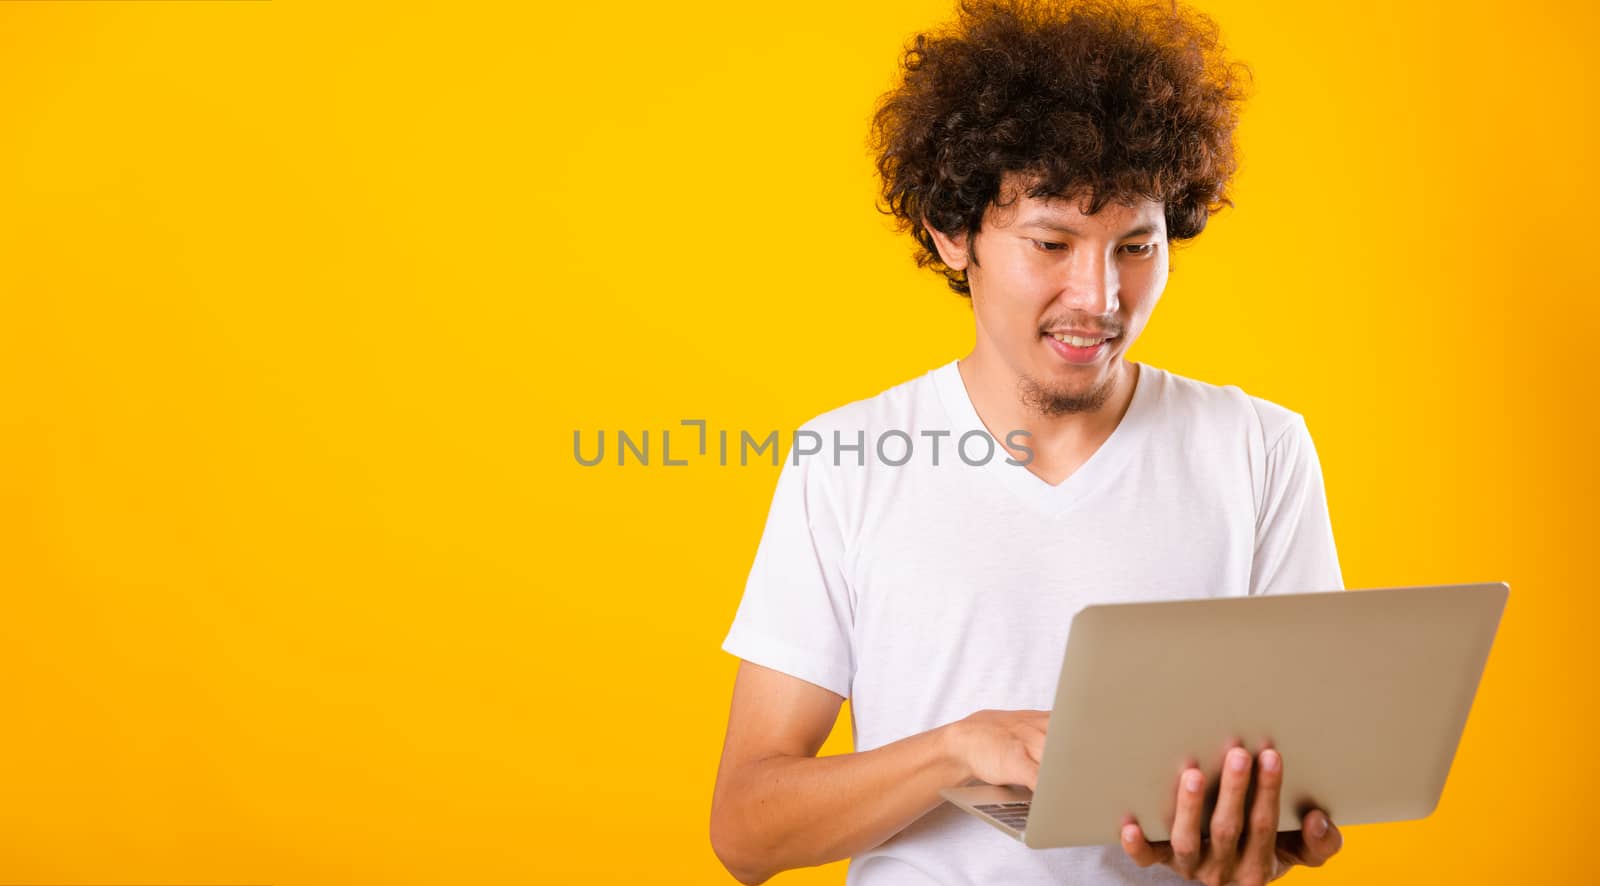 Asian handsome man with curly hair using laptop computer isolate on yellow background with copy space for text